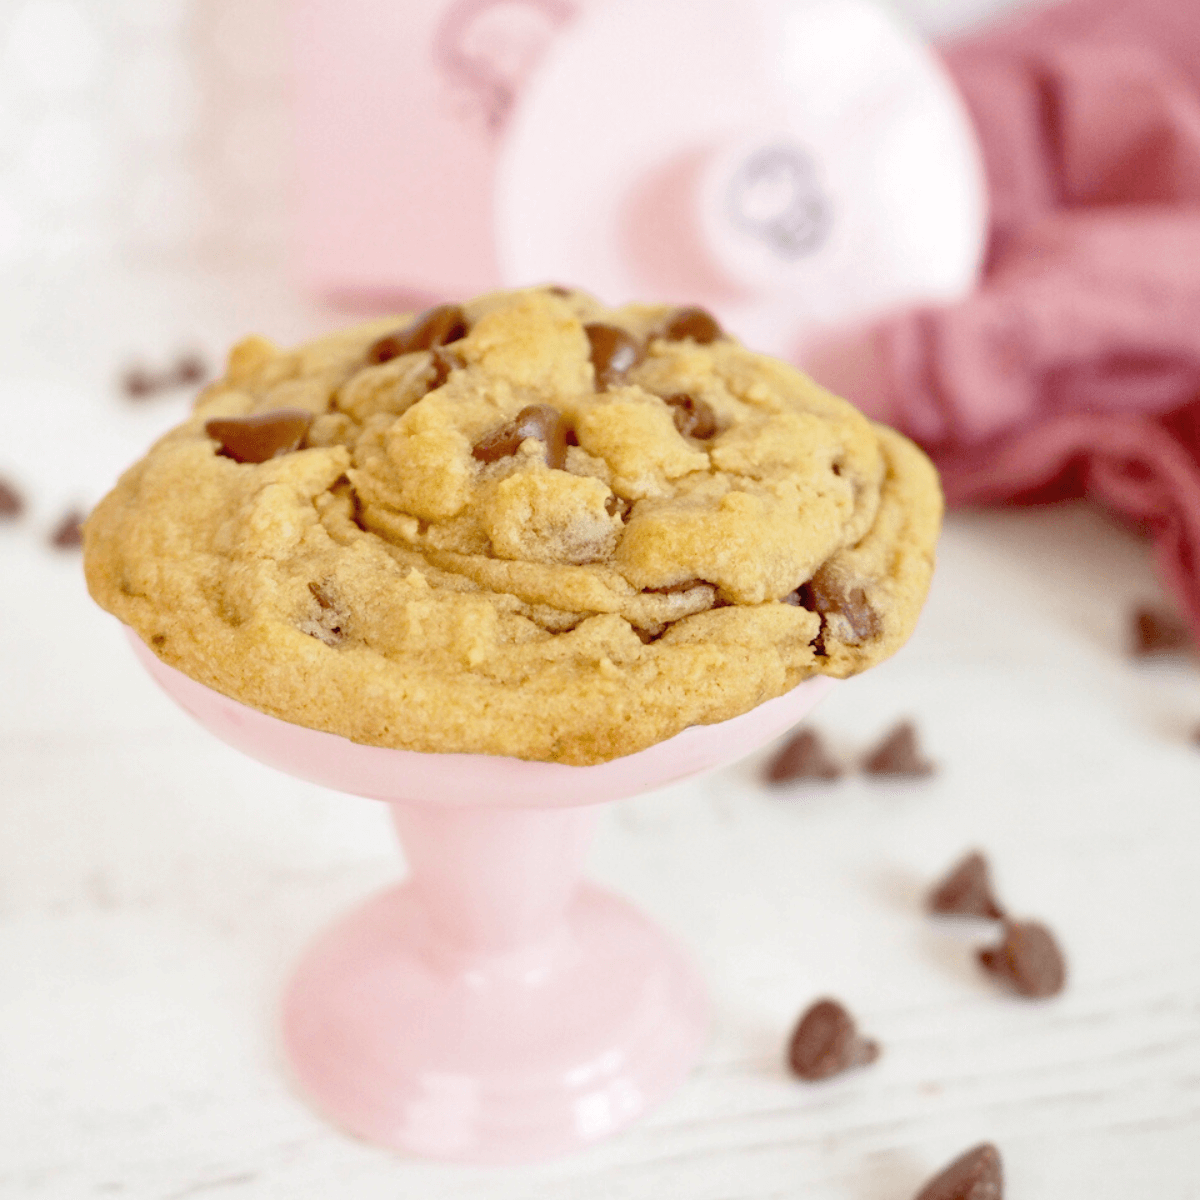 Crumbl copycat chcoolate chip cookie recipe with giant cookie on pink pedestal and chocolate chips laying about.